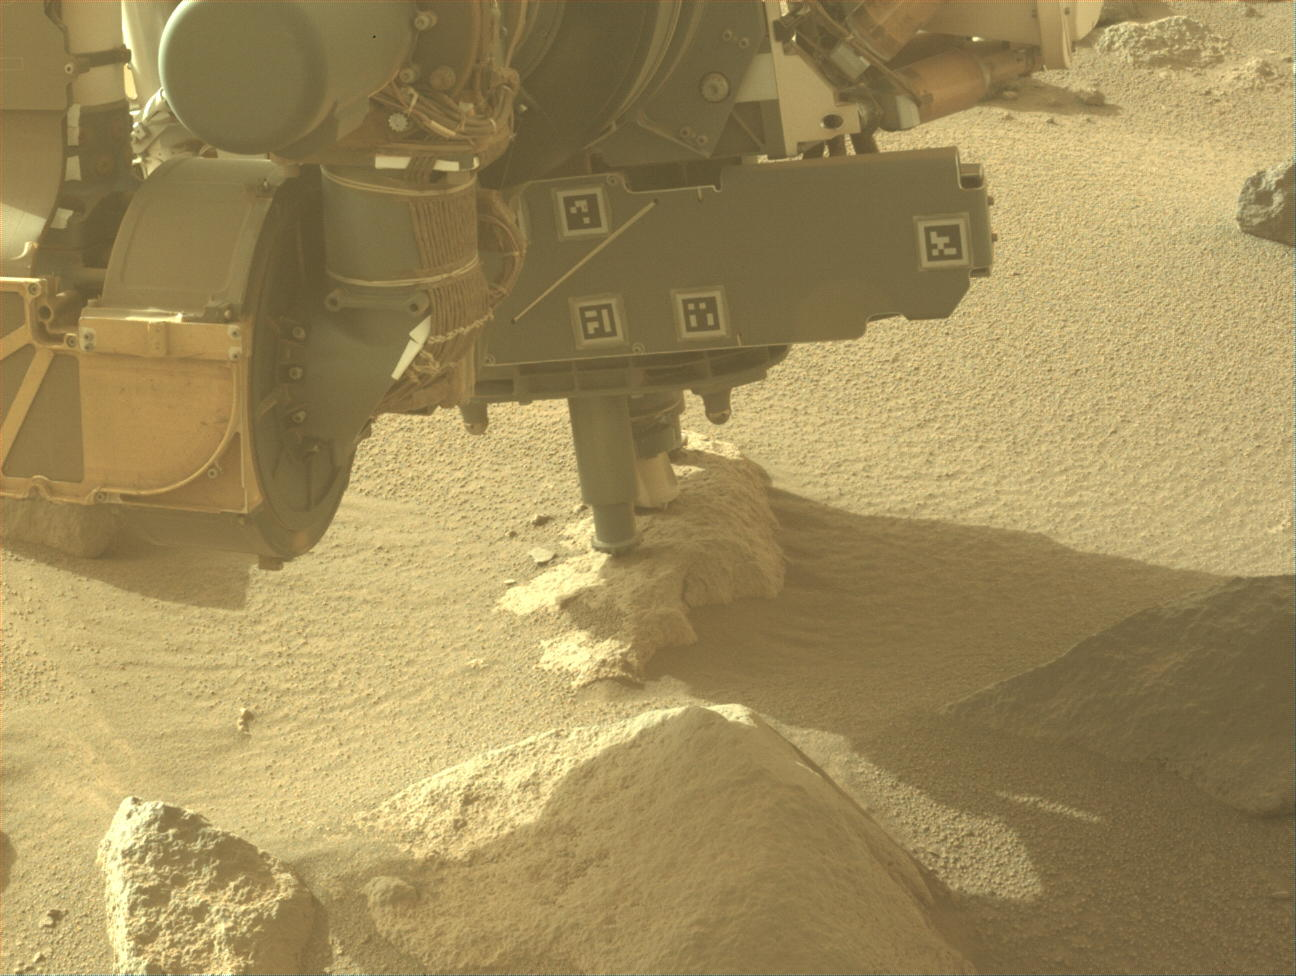 On Sol 1151 (May 16, 2024), Perseverance abraded a carbonate-bearing rock called Old Faithful Geyser in the Western Margin Unit. This activity was captures by the rover’s Left Hazard Avoidance Camera (HAZCAM).